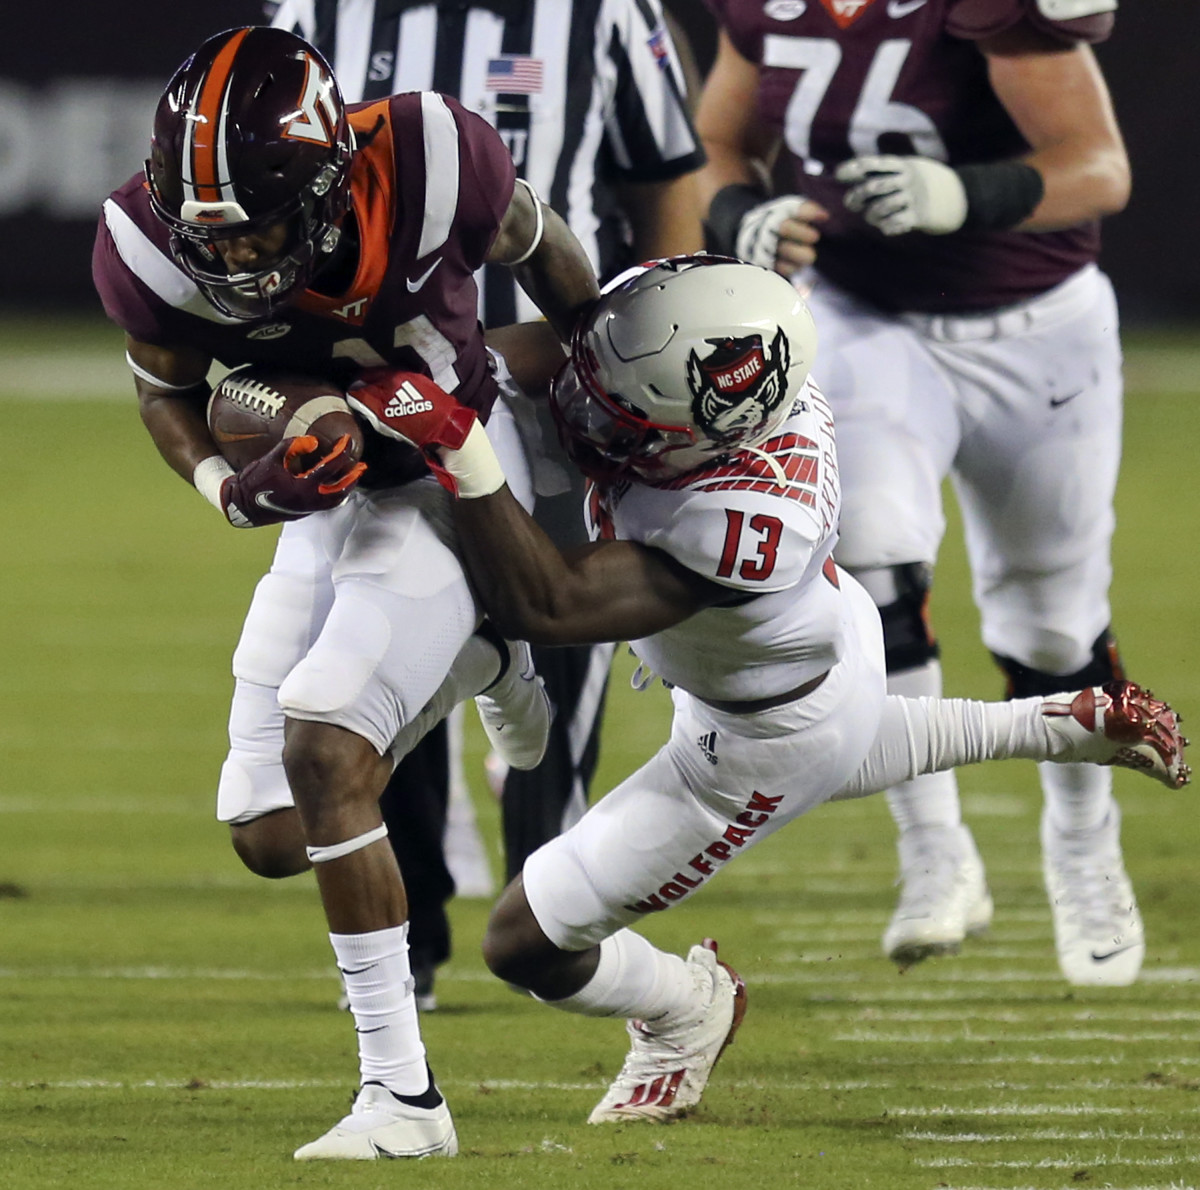 Tyler Baker-Williams makes a tackle on Virginia Tech's Tre Turner